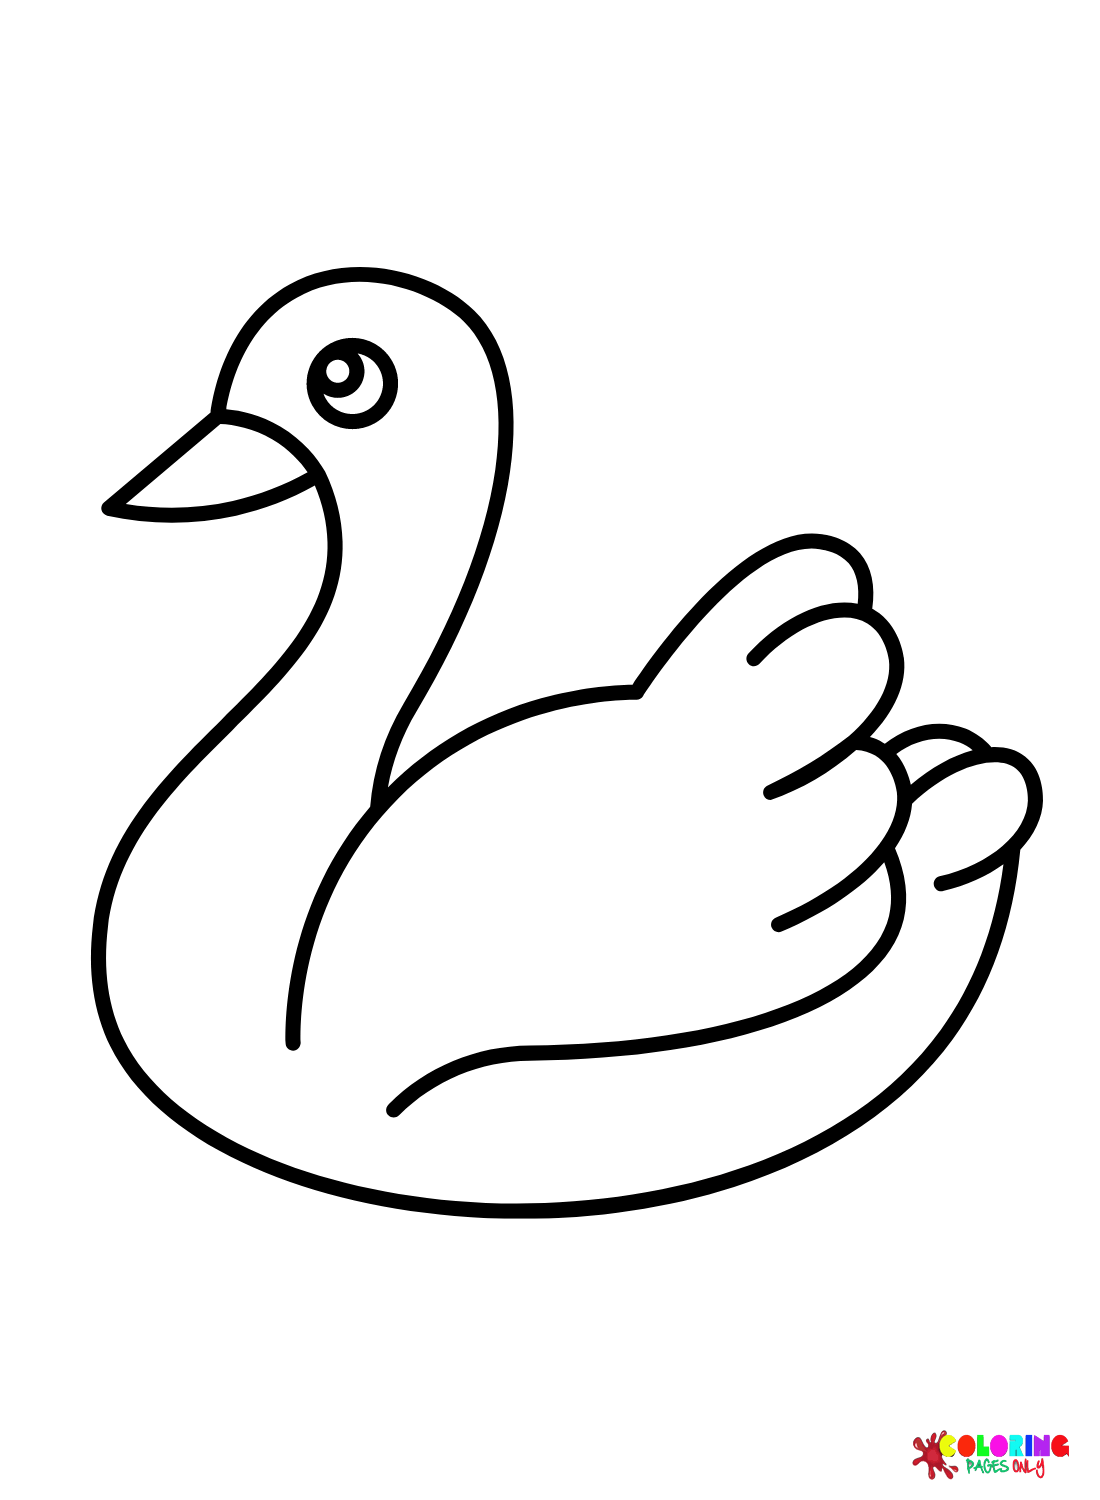 Swan Coloring Pages Printable for Free Download